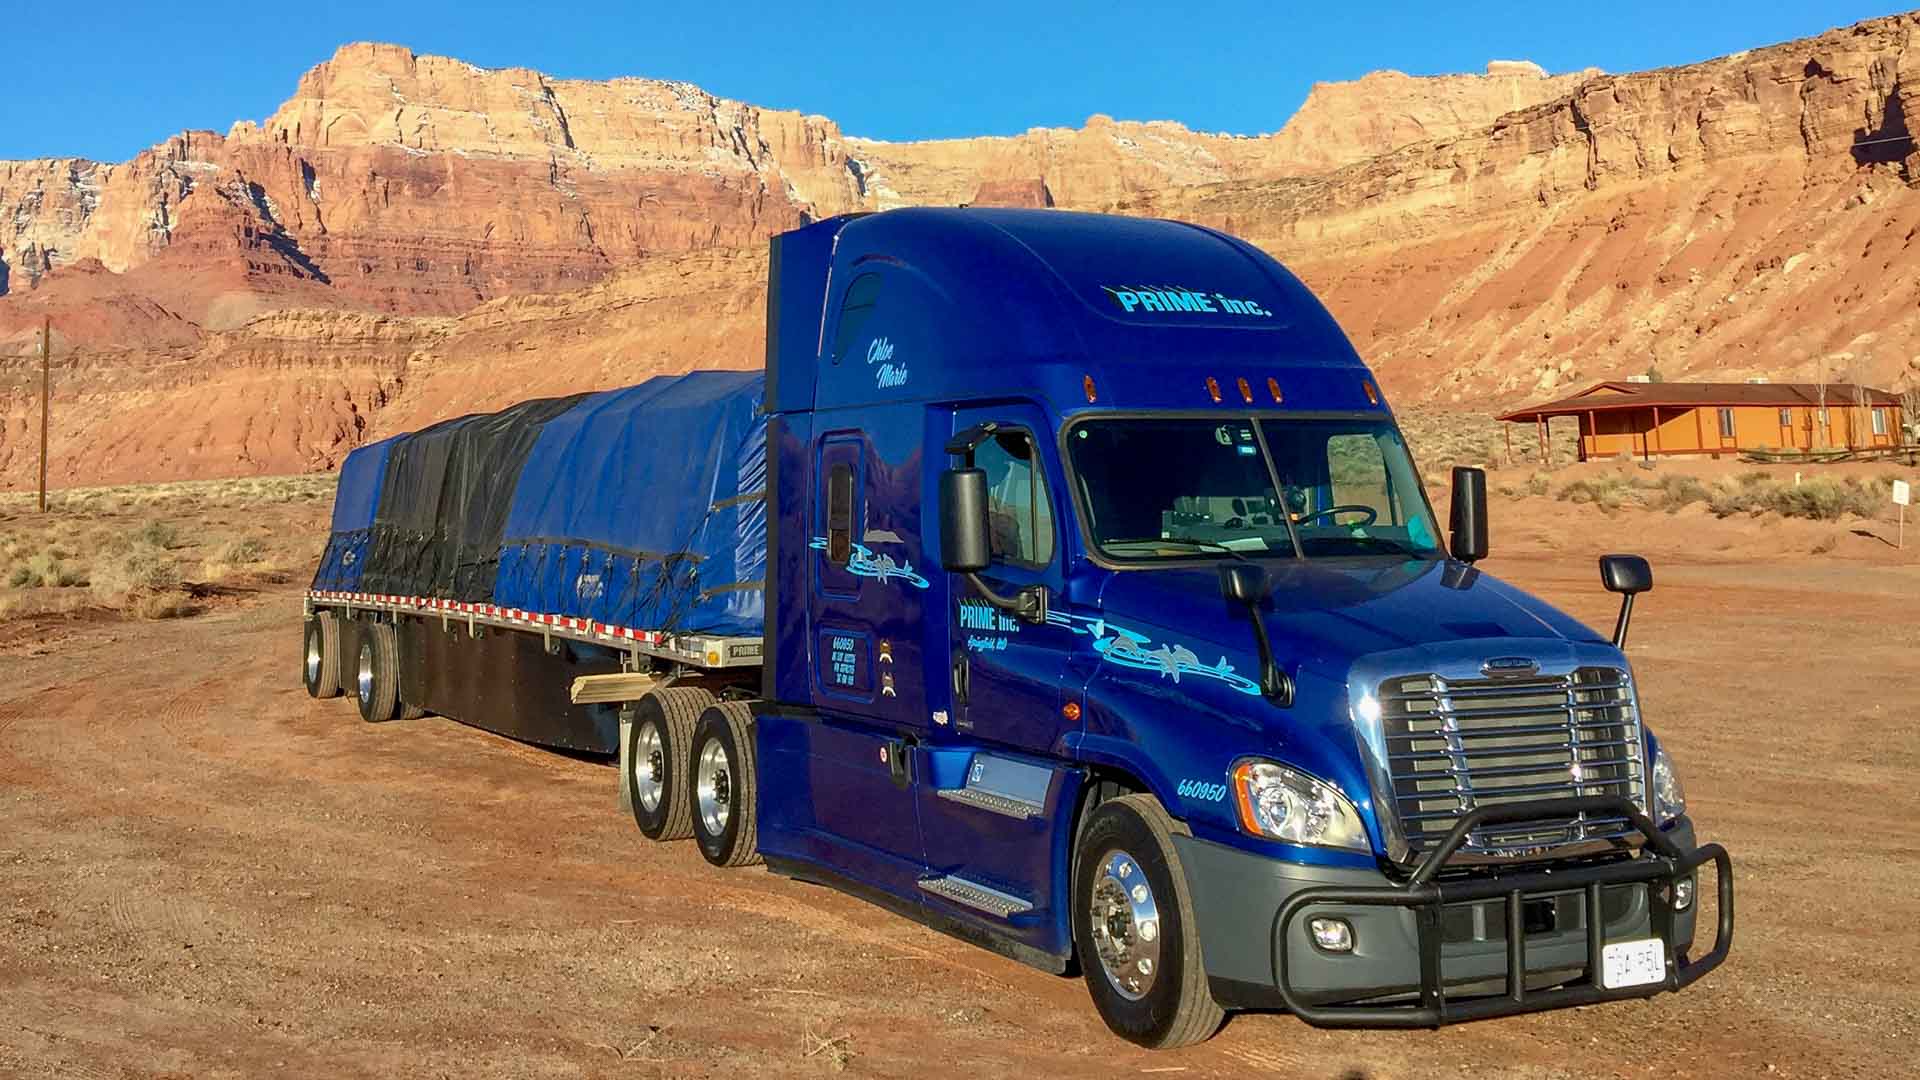 Blue Freightliner semi-truck towing a covered flatbed trailer surrounded by a rocky landscape.